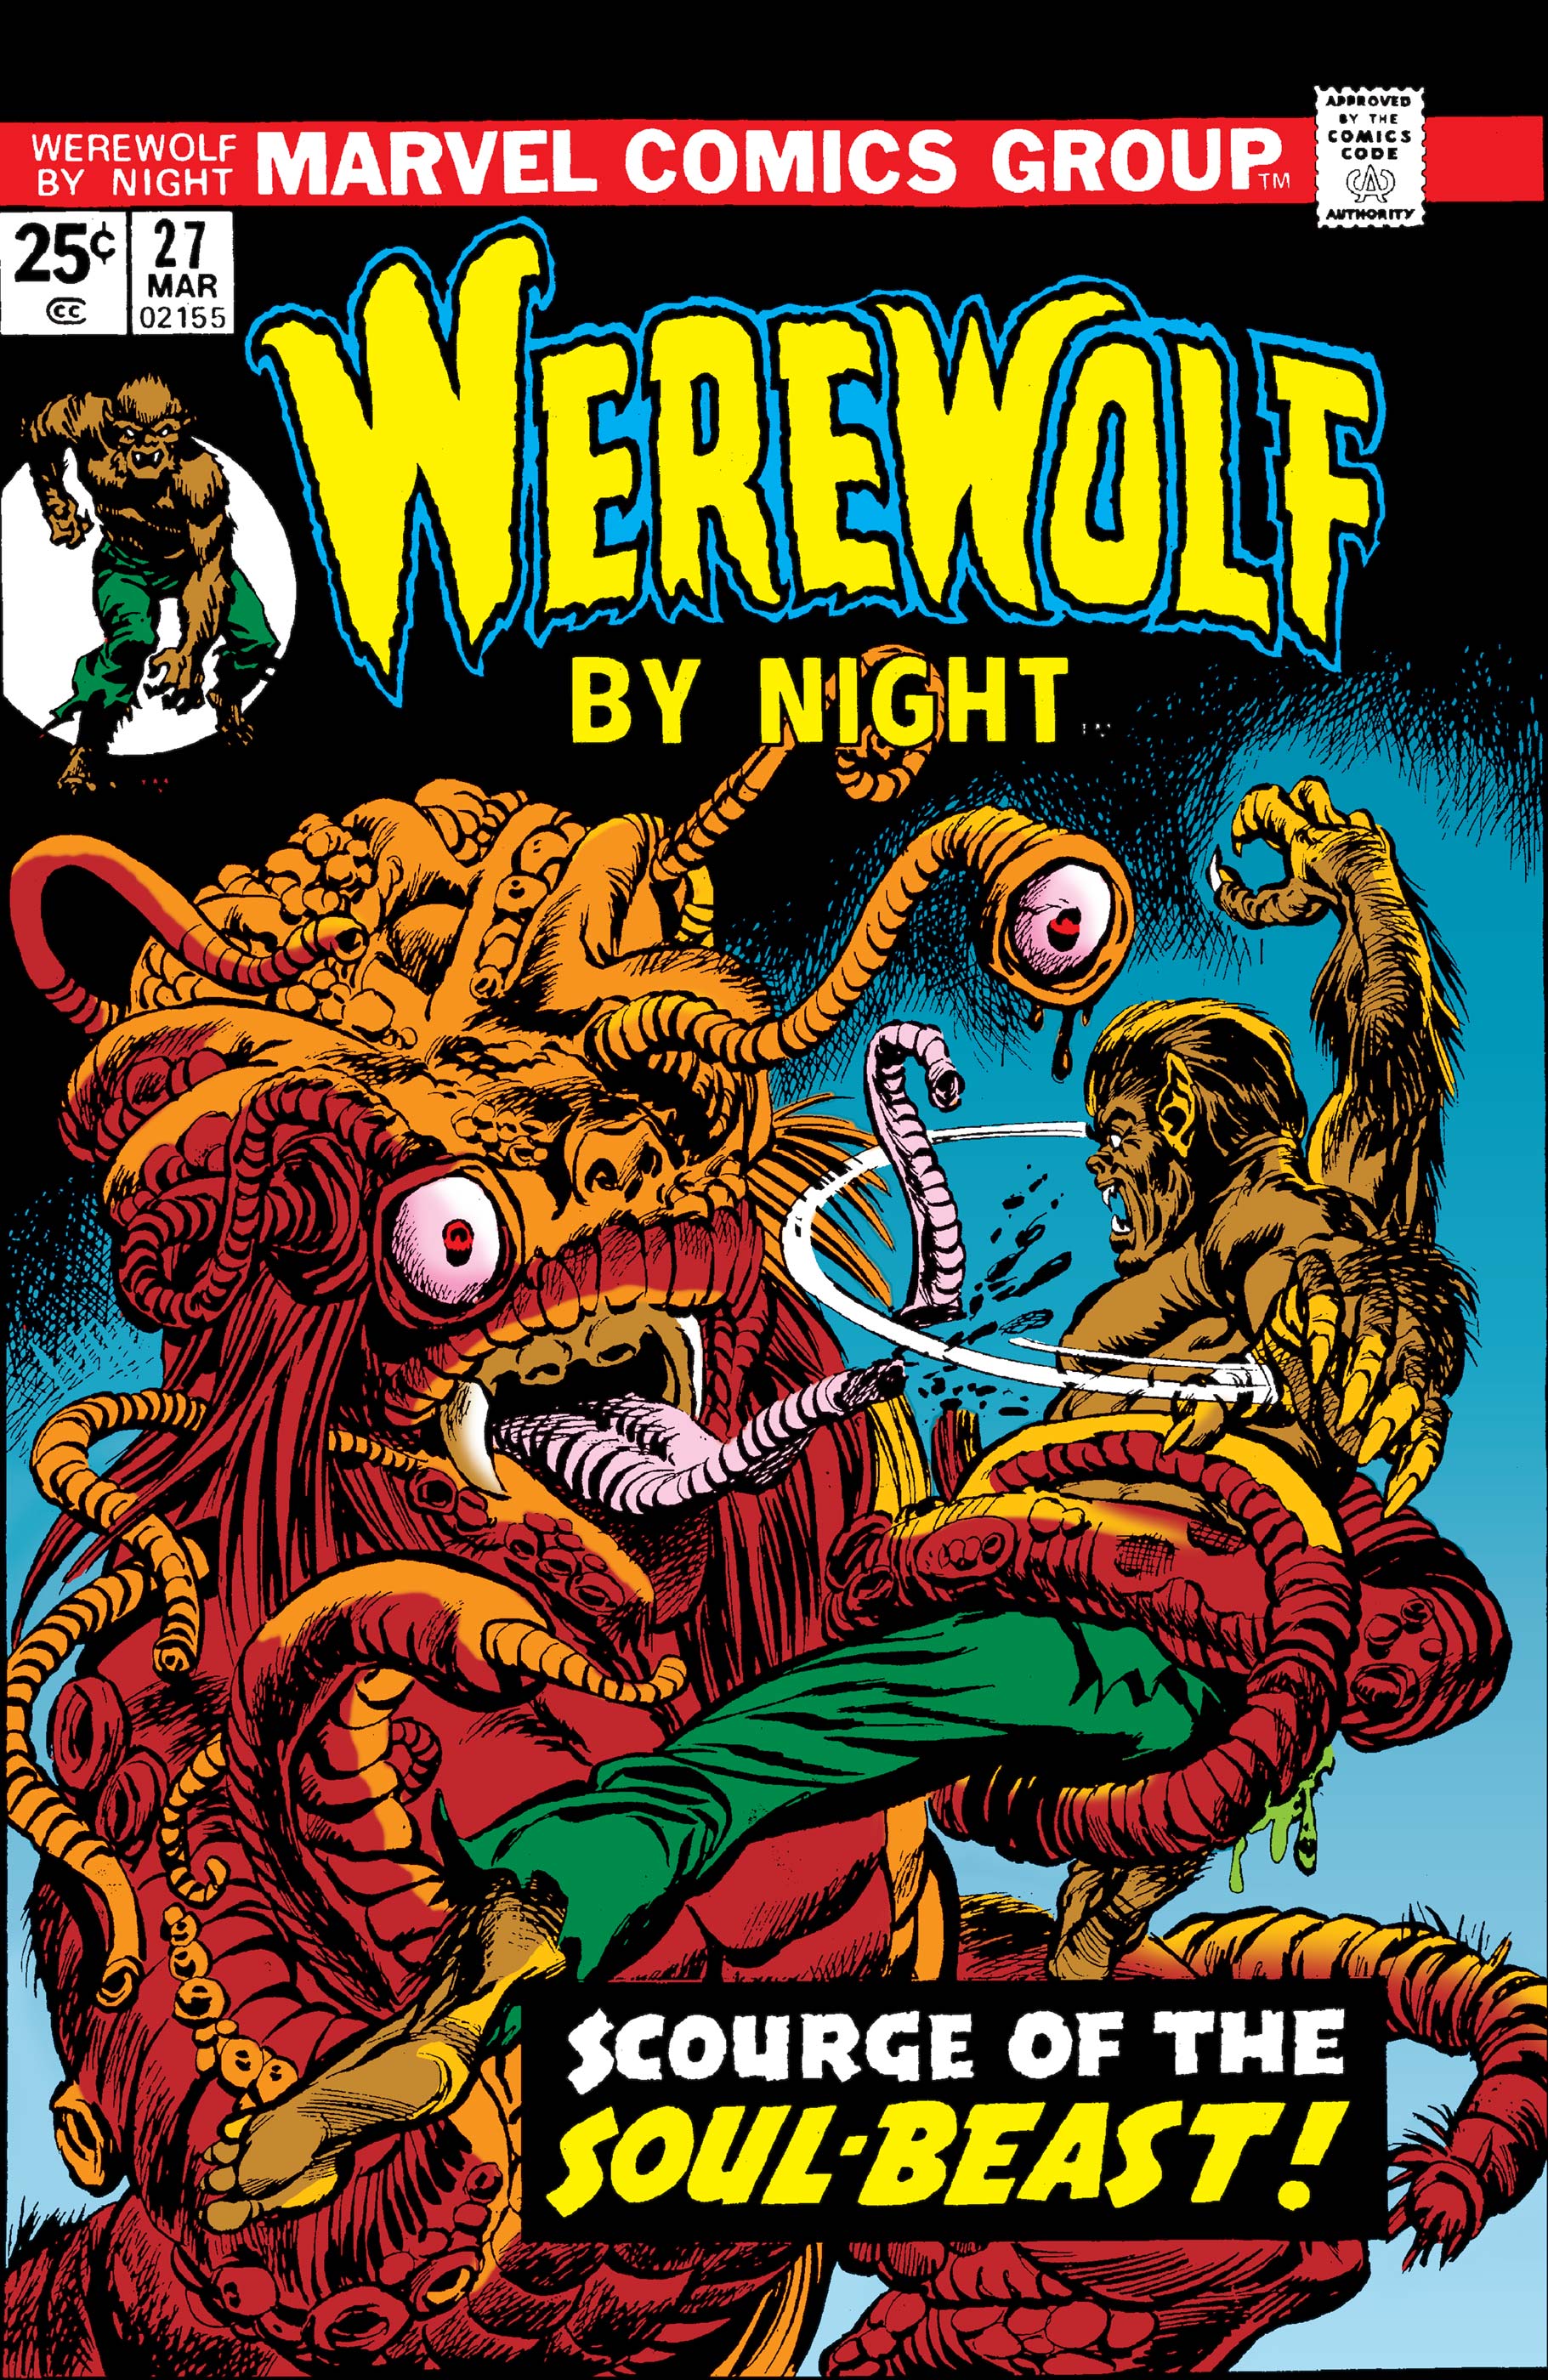 Werewolf by Night (1972) #18, Comic Issues